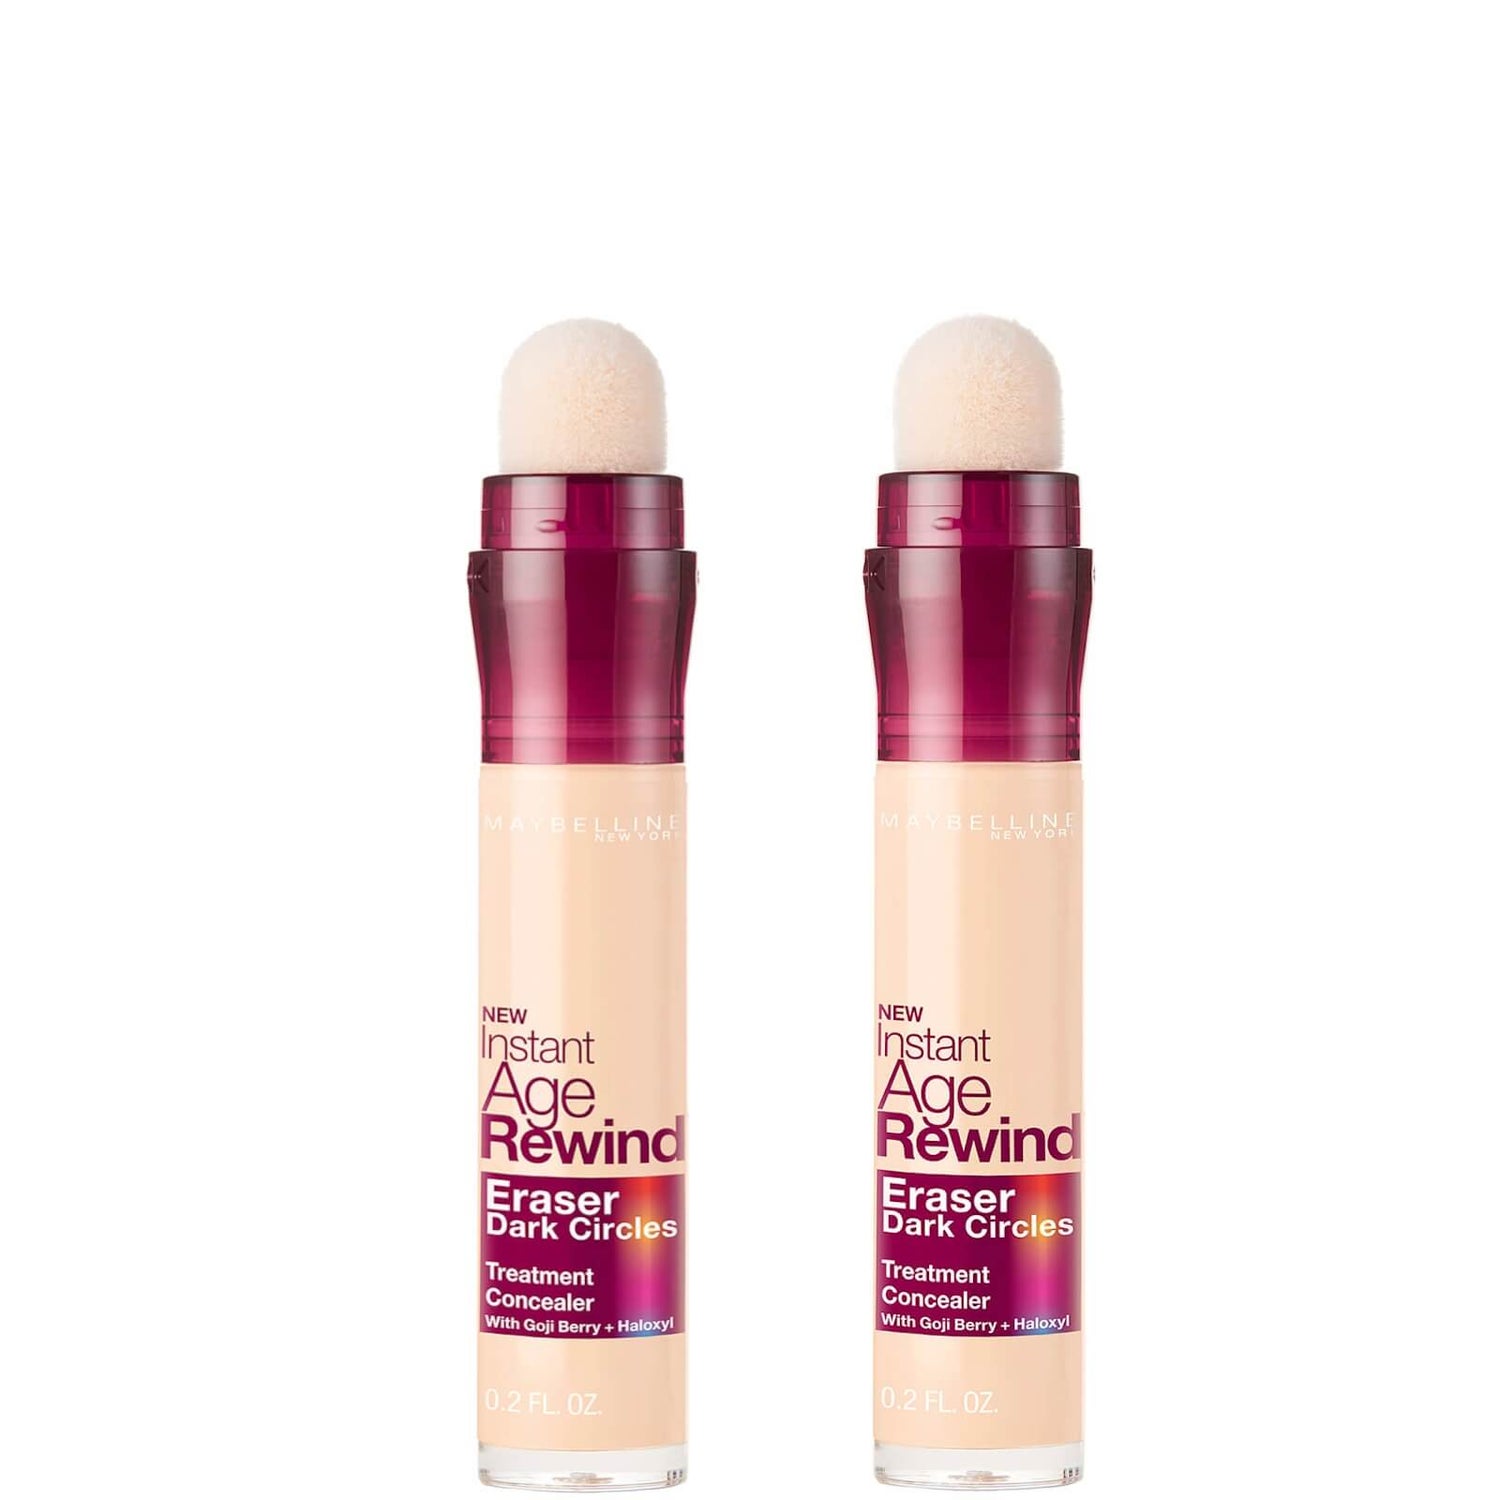 Maybelline Instant Age Rewind Concealer Duo - Ivory